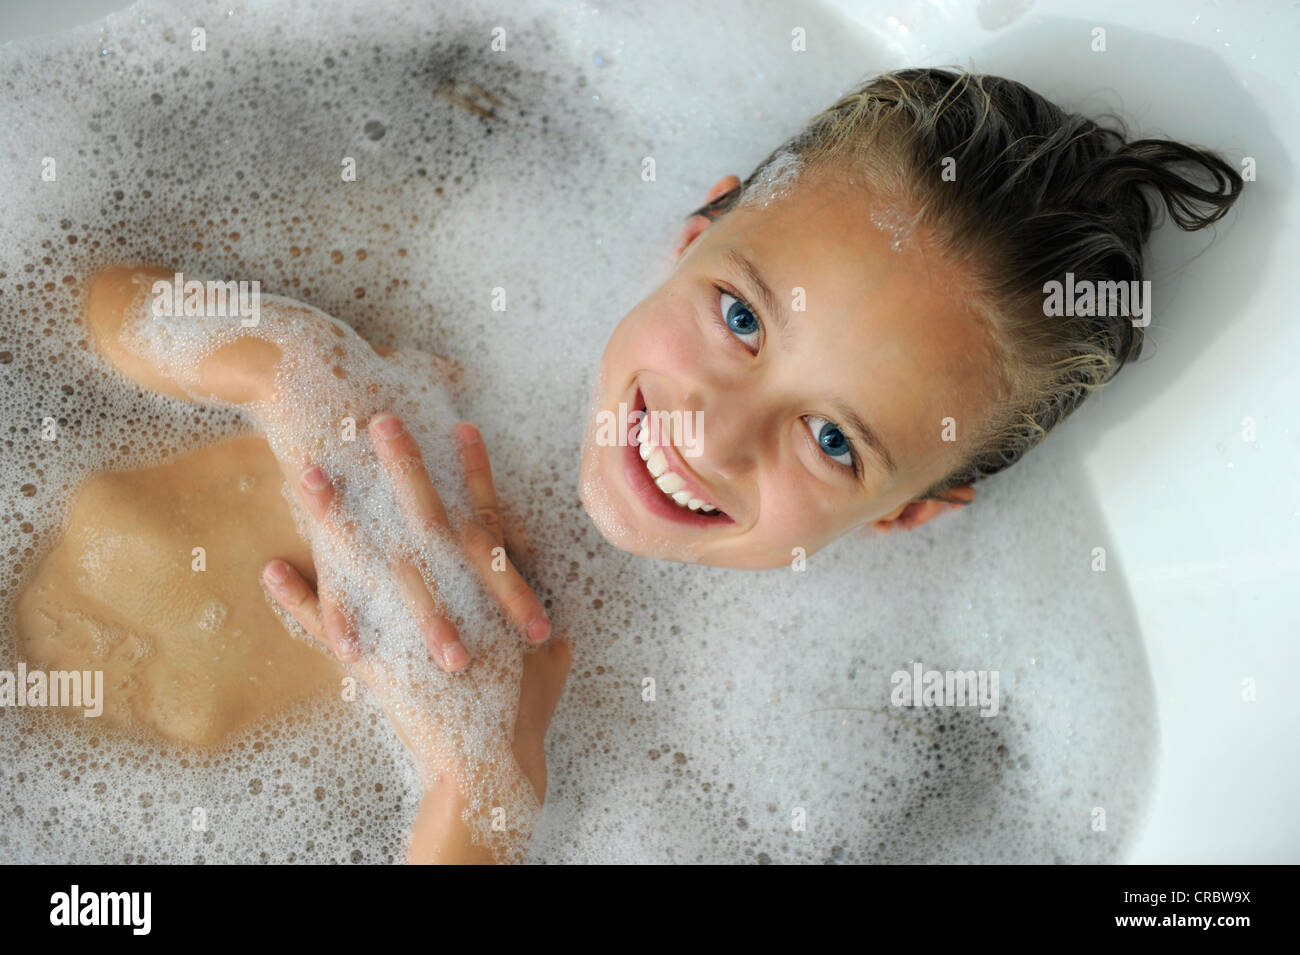 Young girl in a bathtub Stock Photo